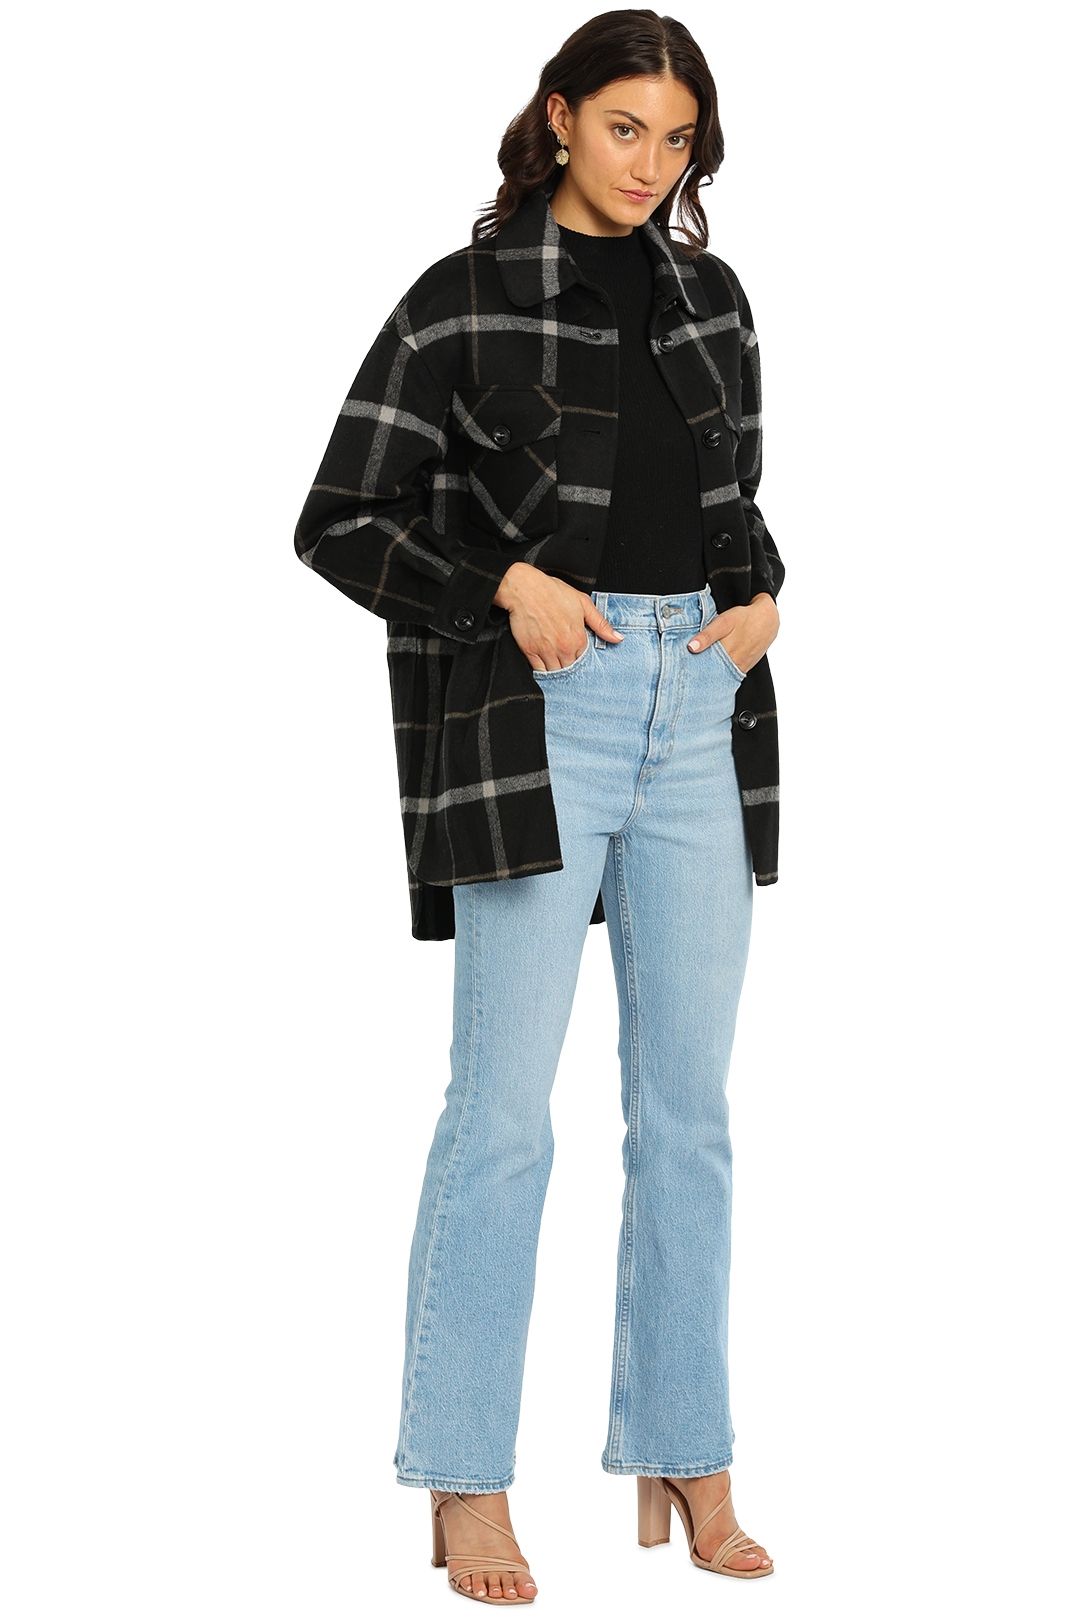 Belle and Bloom River’s Edge Plaid Shacket Black Long Sleeve